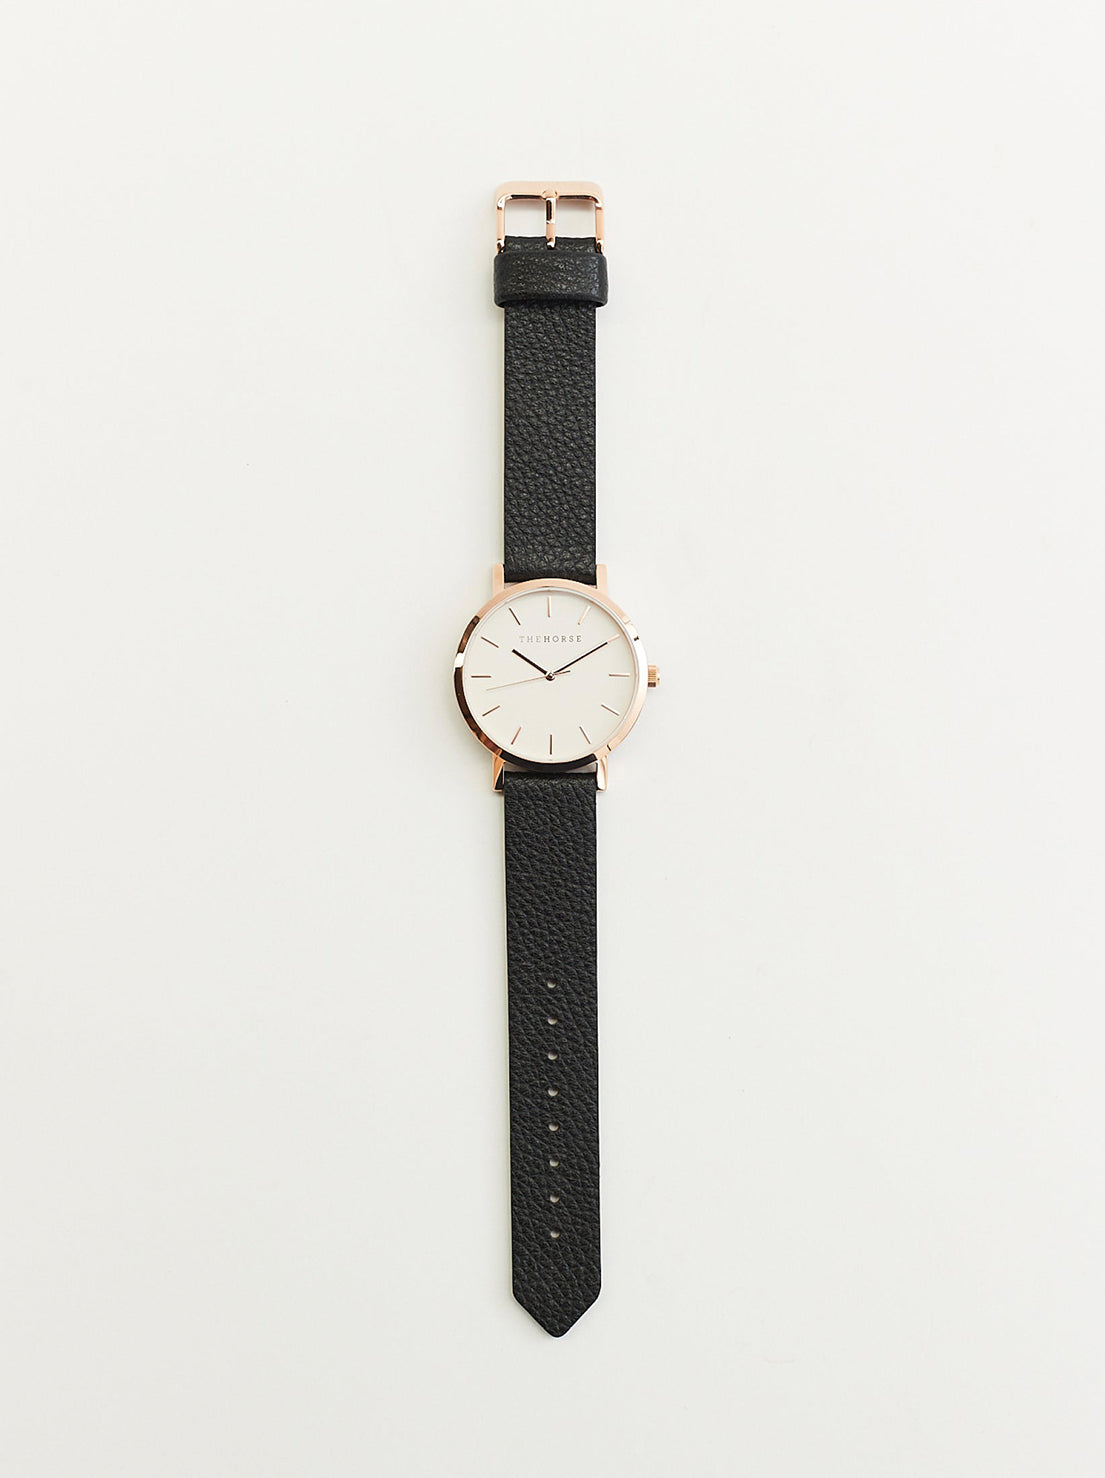 The Horse - The Mini Original Watch - Rose Gold / White Dial / Black Leather